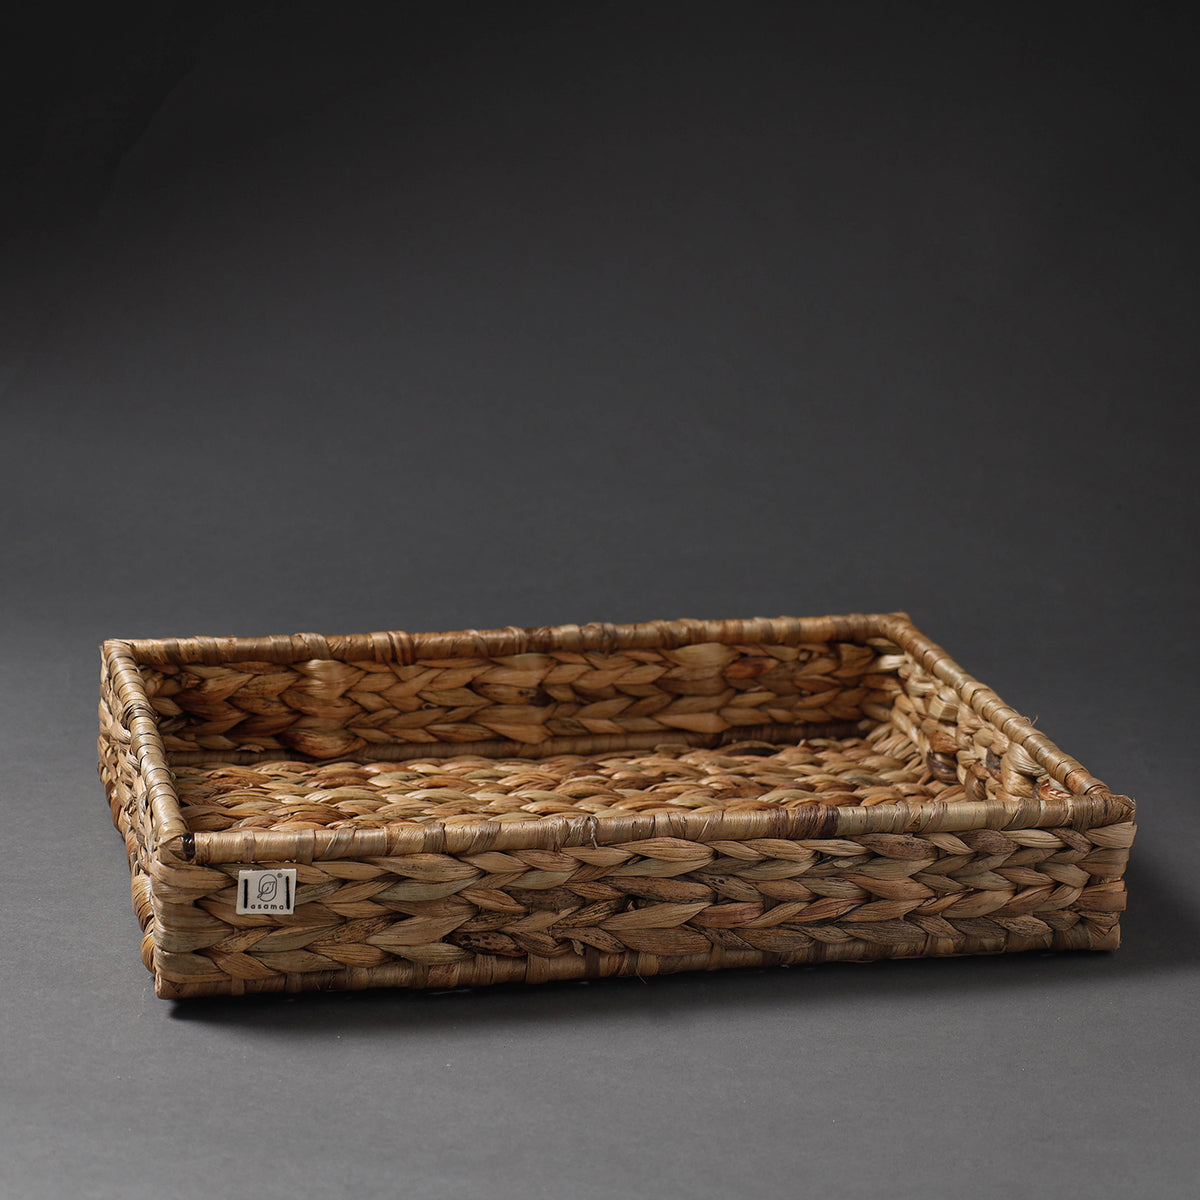 Handcrafted Organic Water Hyacinth Rectangular Tray (17 x 11 in)